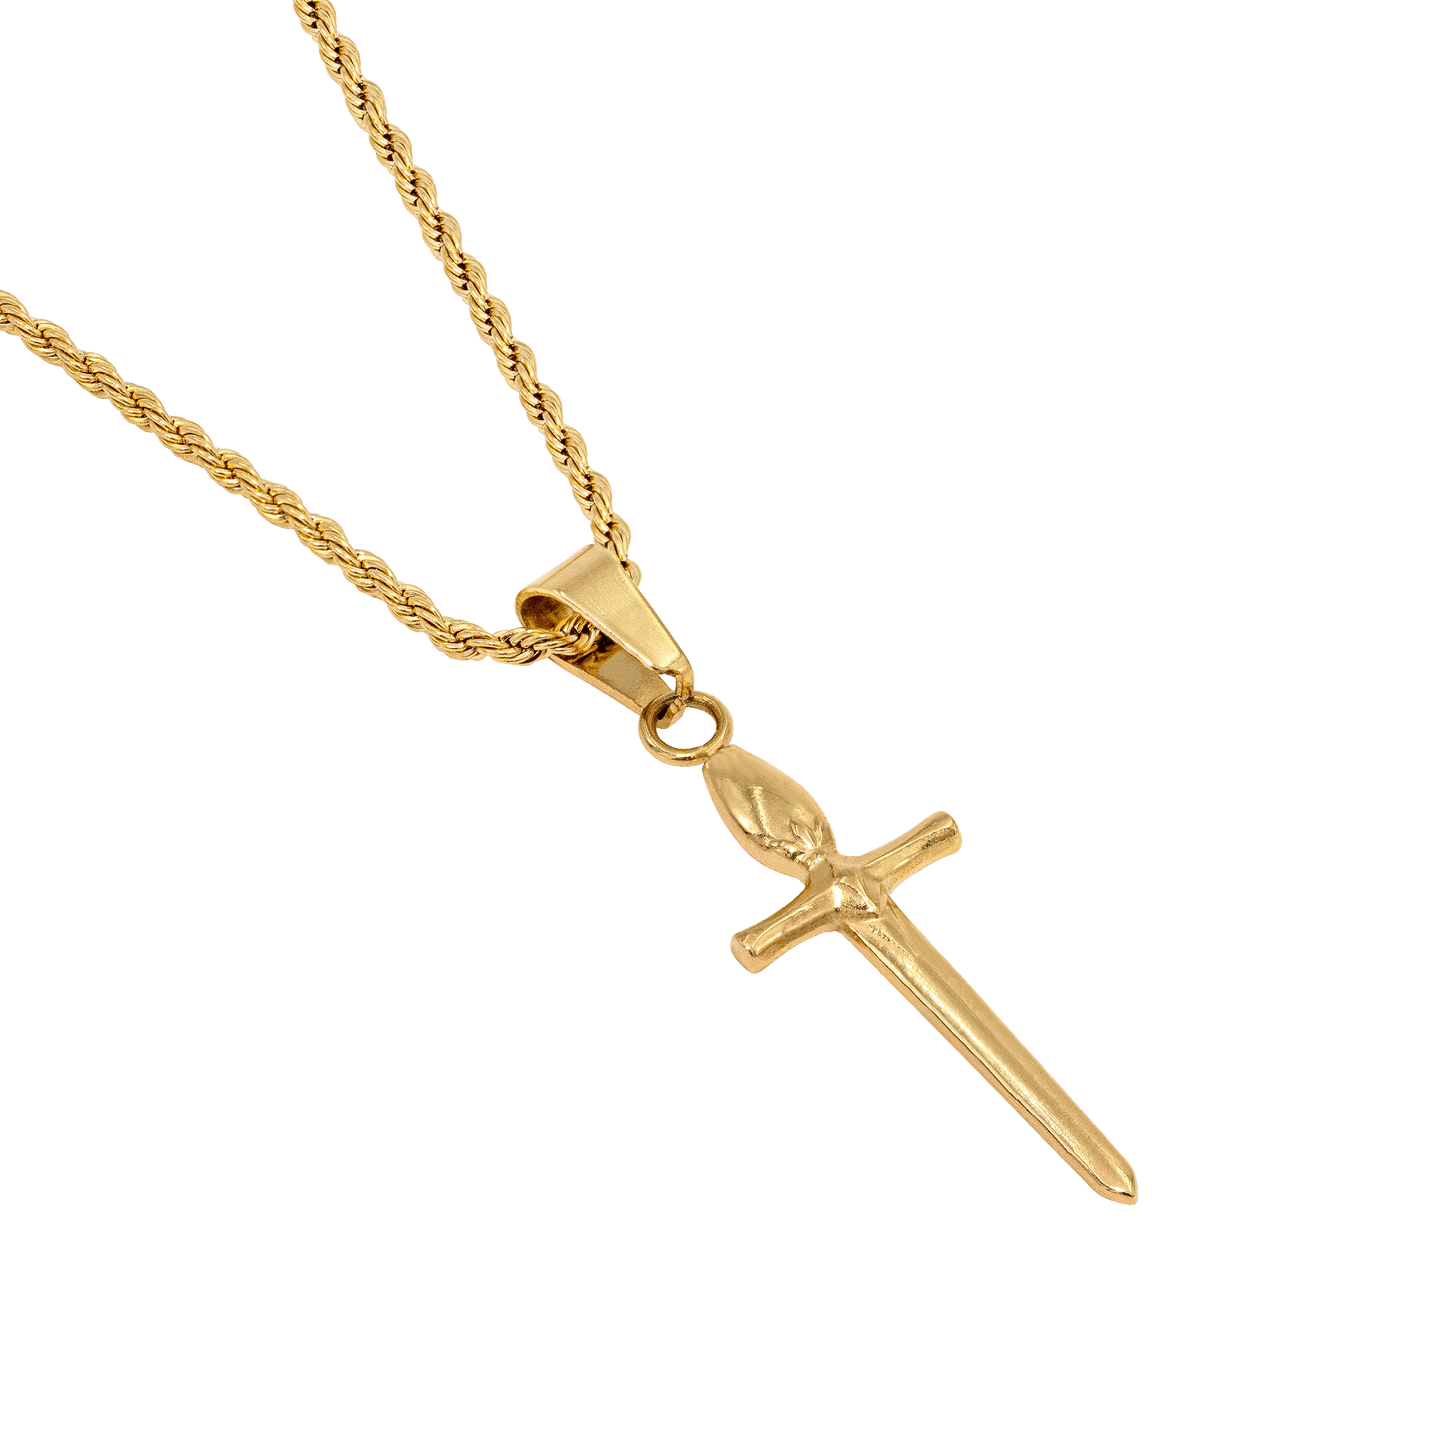 About Liberty Necklace Gold